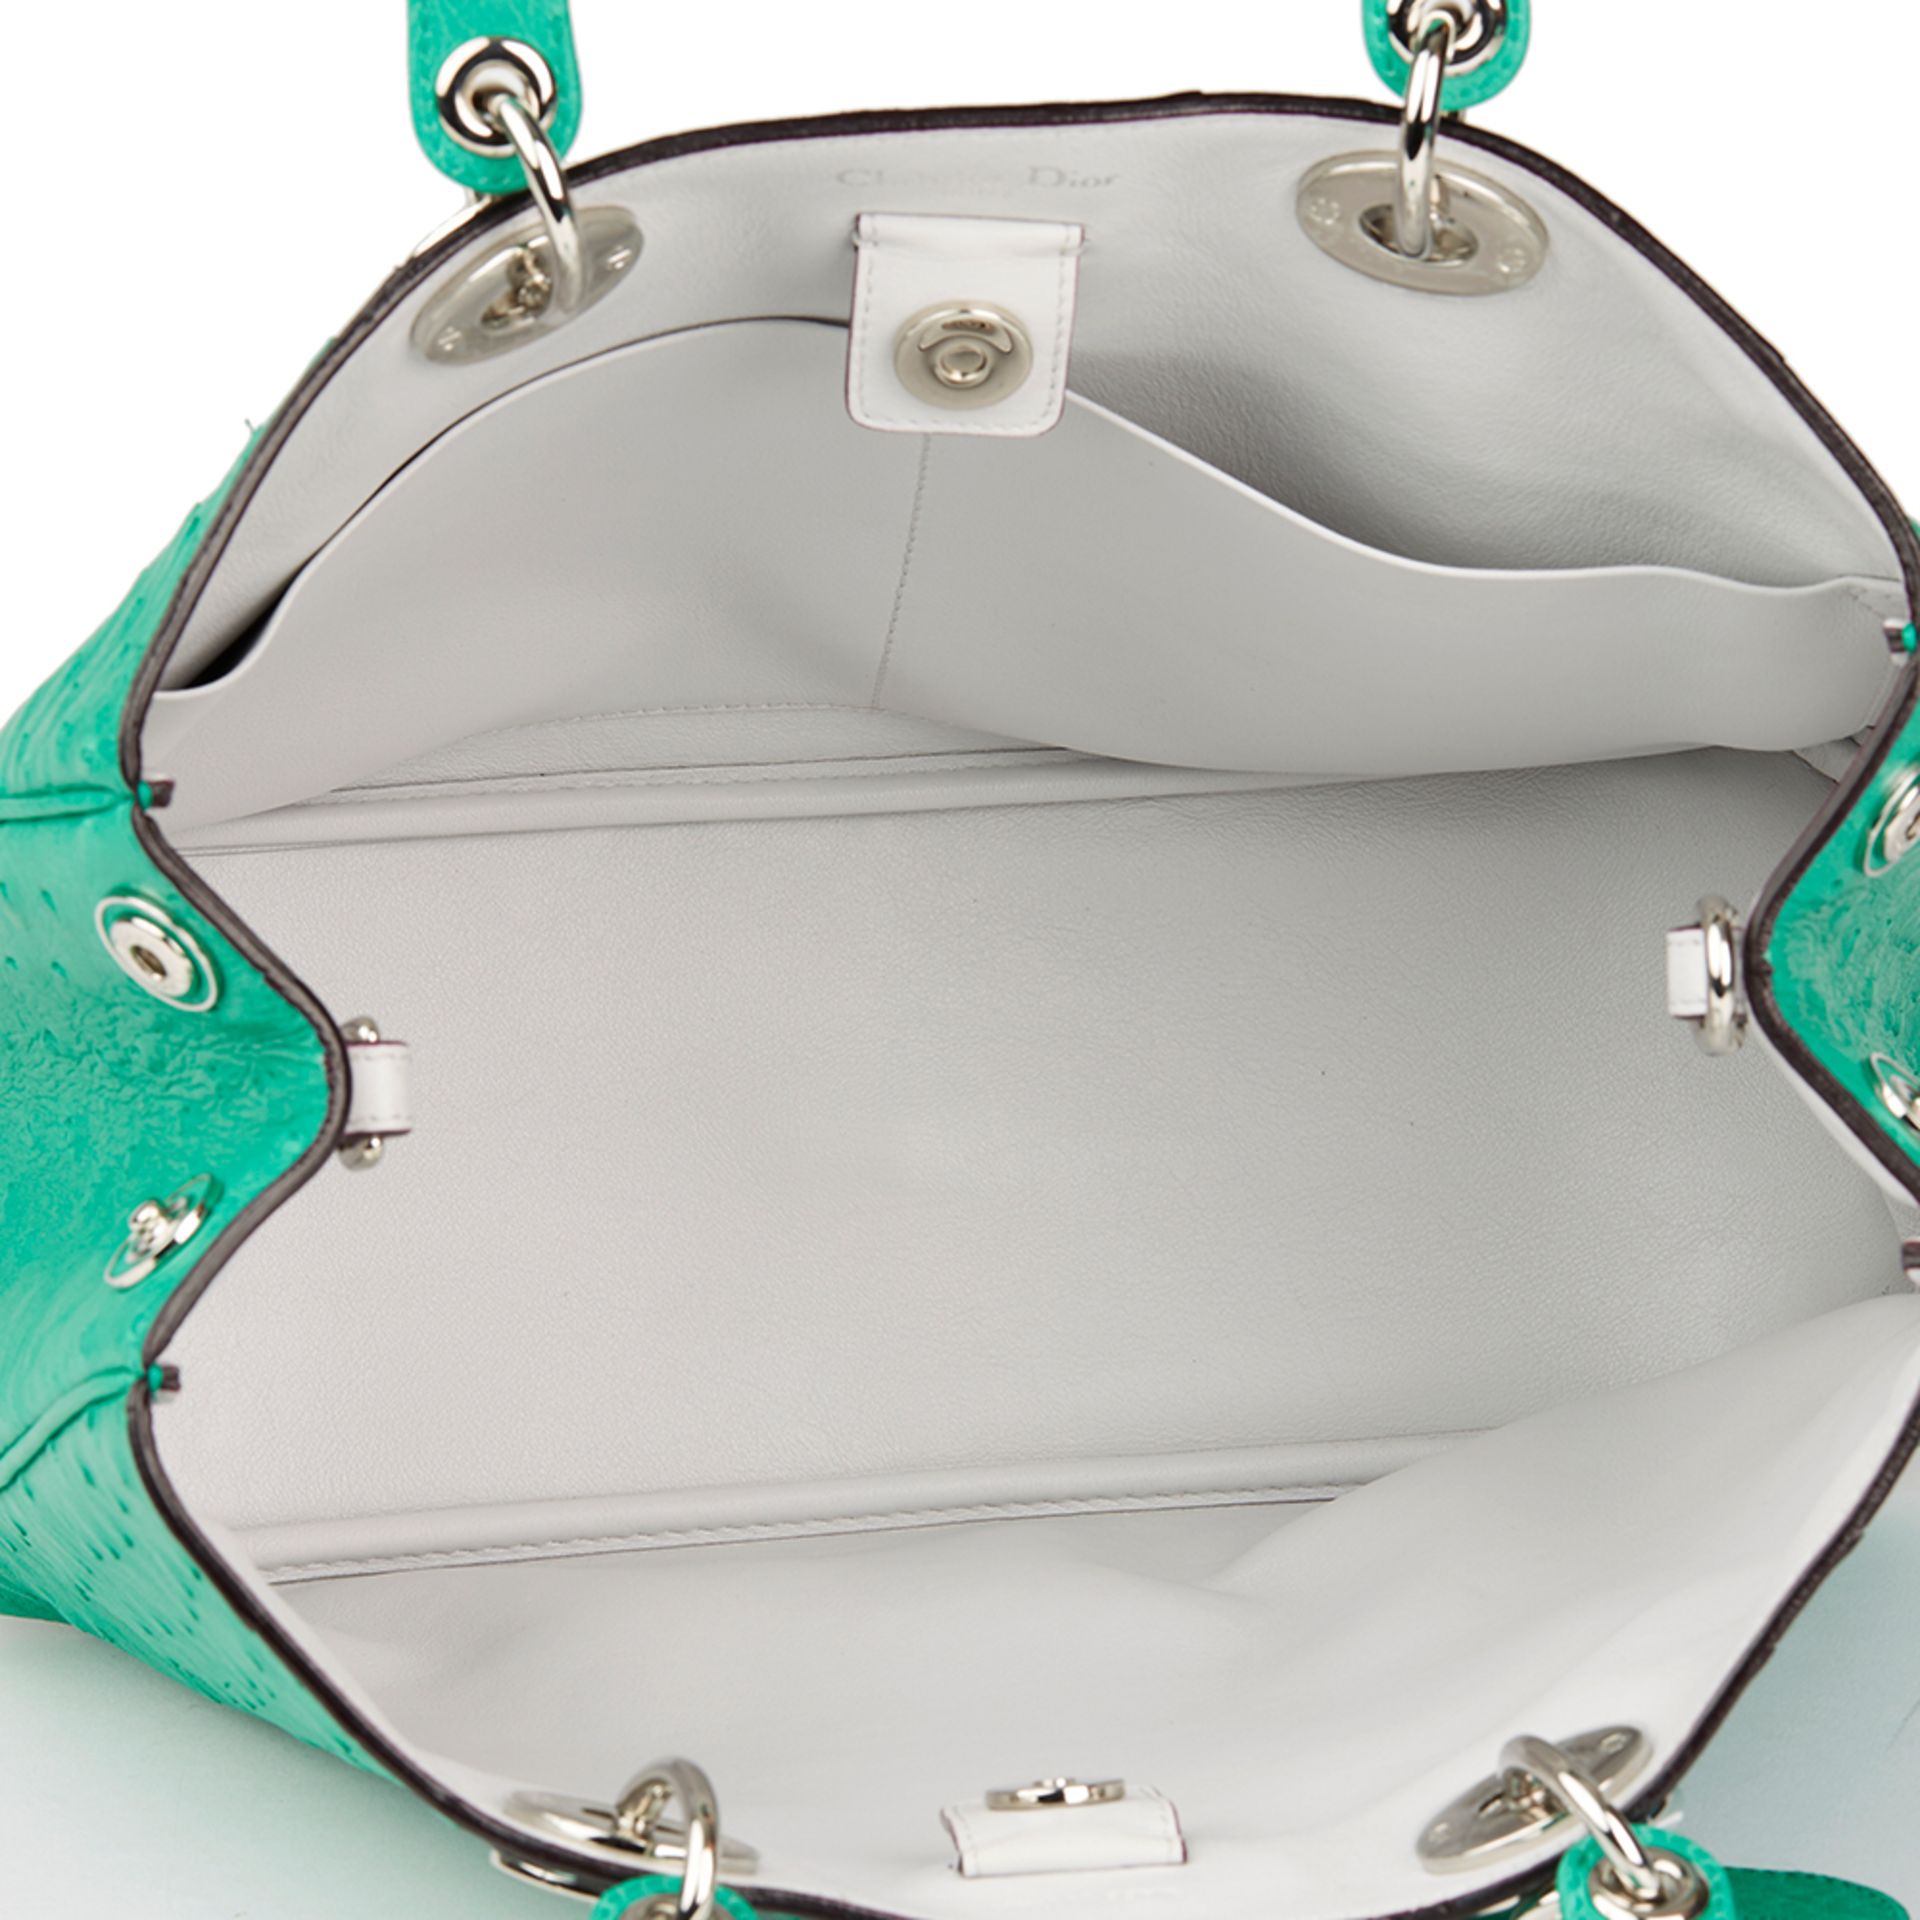 Christian Dior Emerald Ostrich Leather Diorissimo Mm - Image 4 of 11